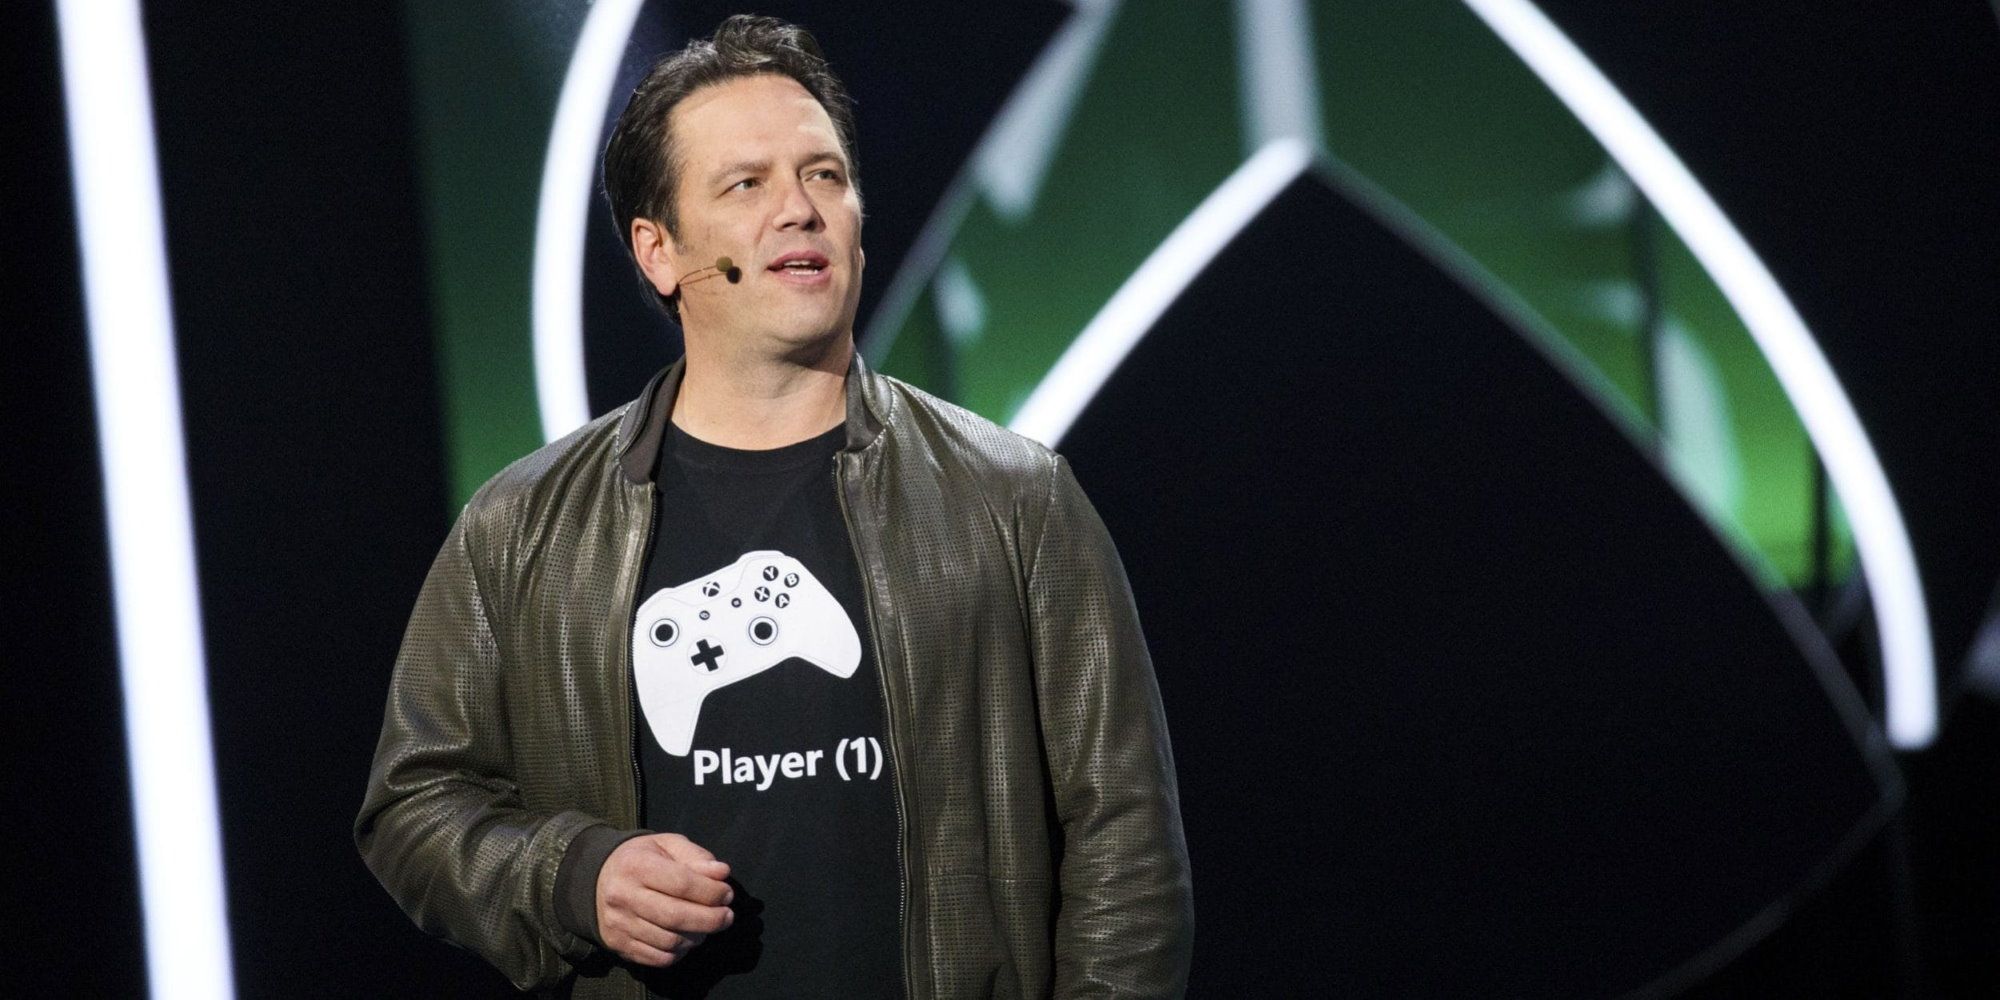 Head of Xbox Phil Spencer Talks About the Choice to Delay Starfield